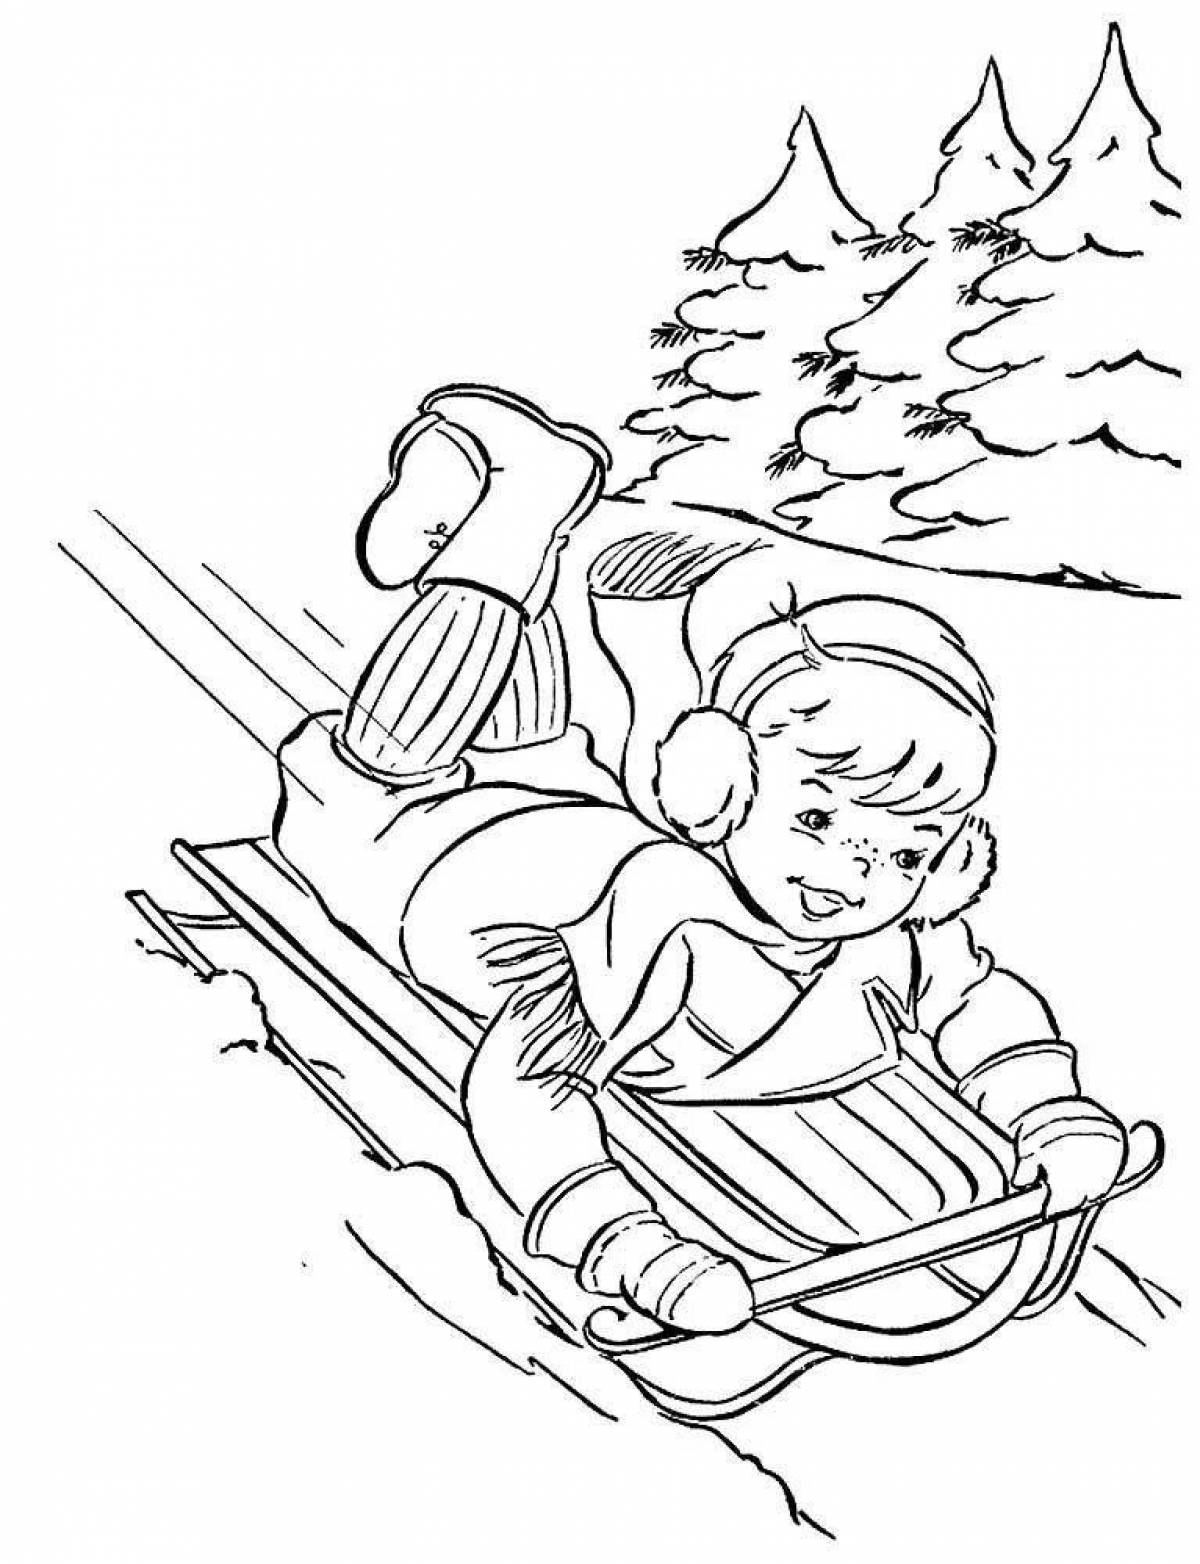 Coloring book smart child on a sled